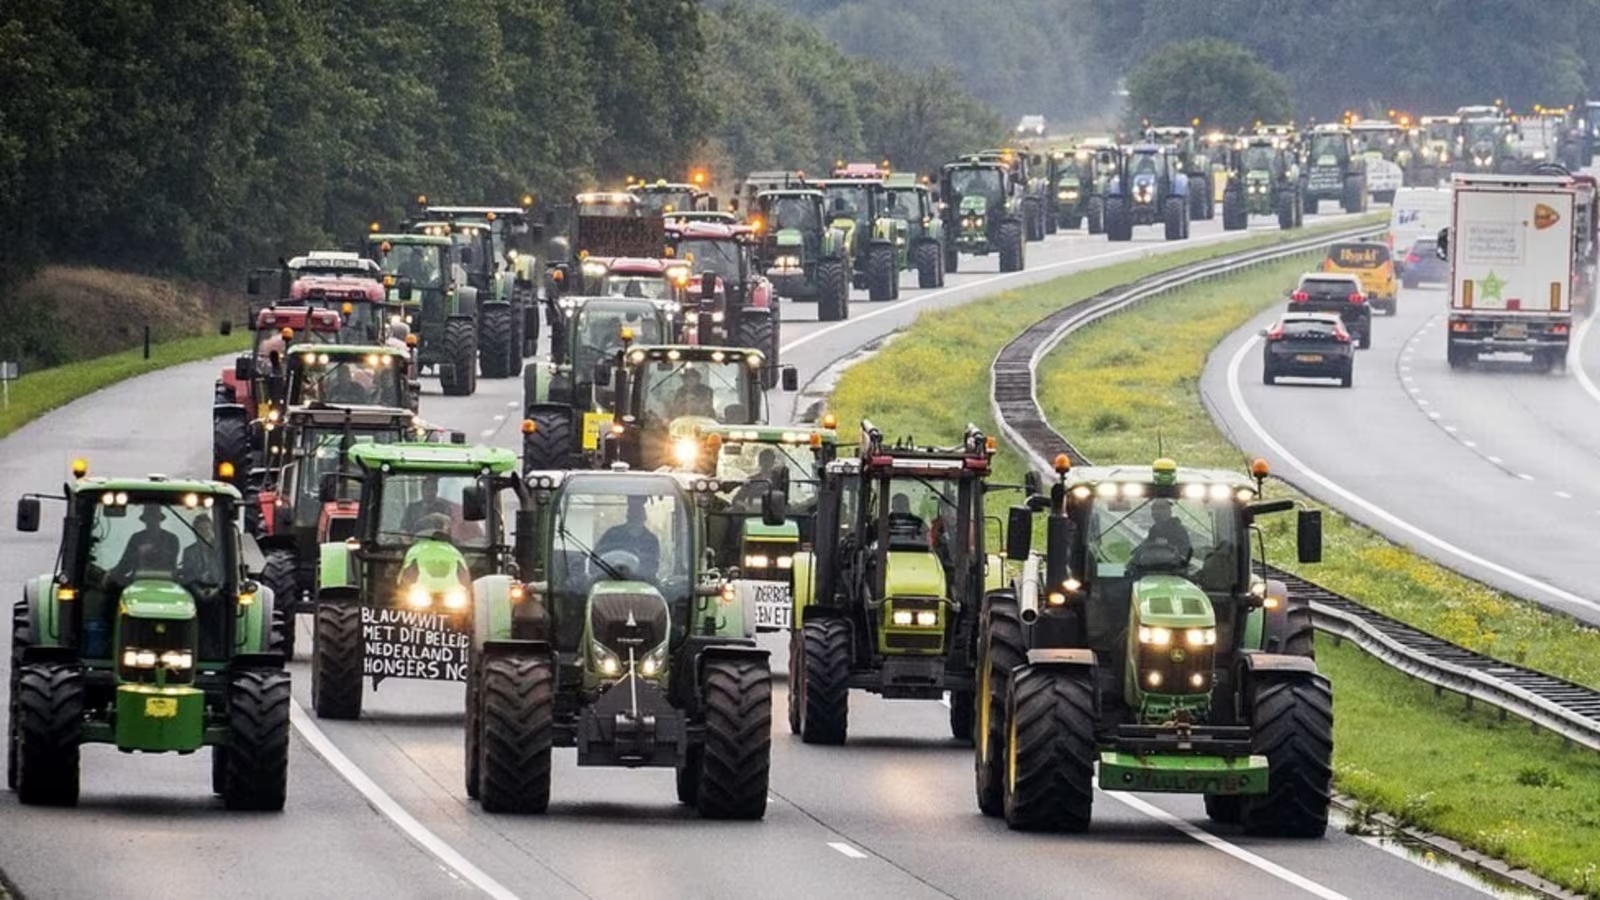 European farmers unite against taxes in Brussel's protest (Credits: Hindustan Times)